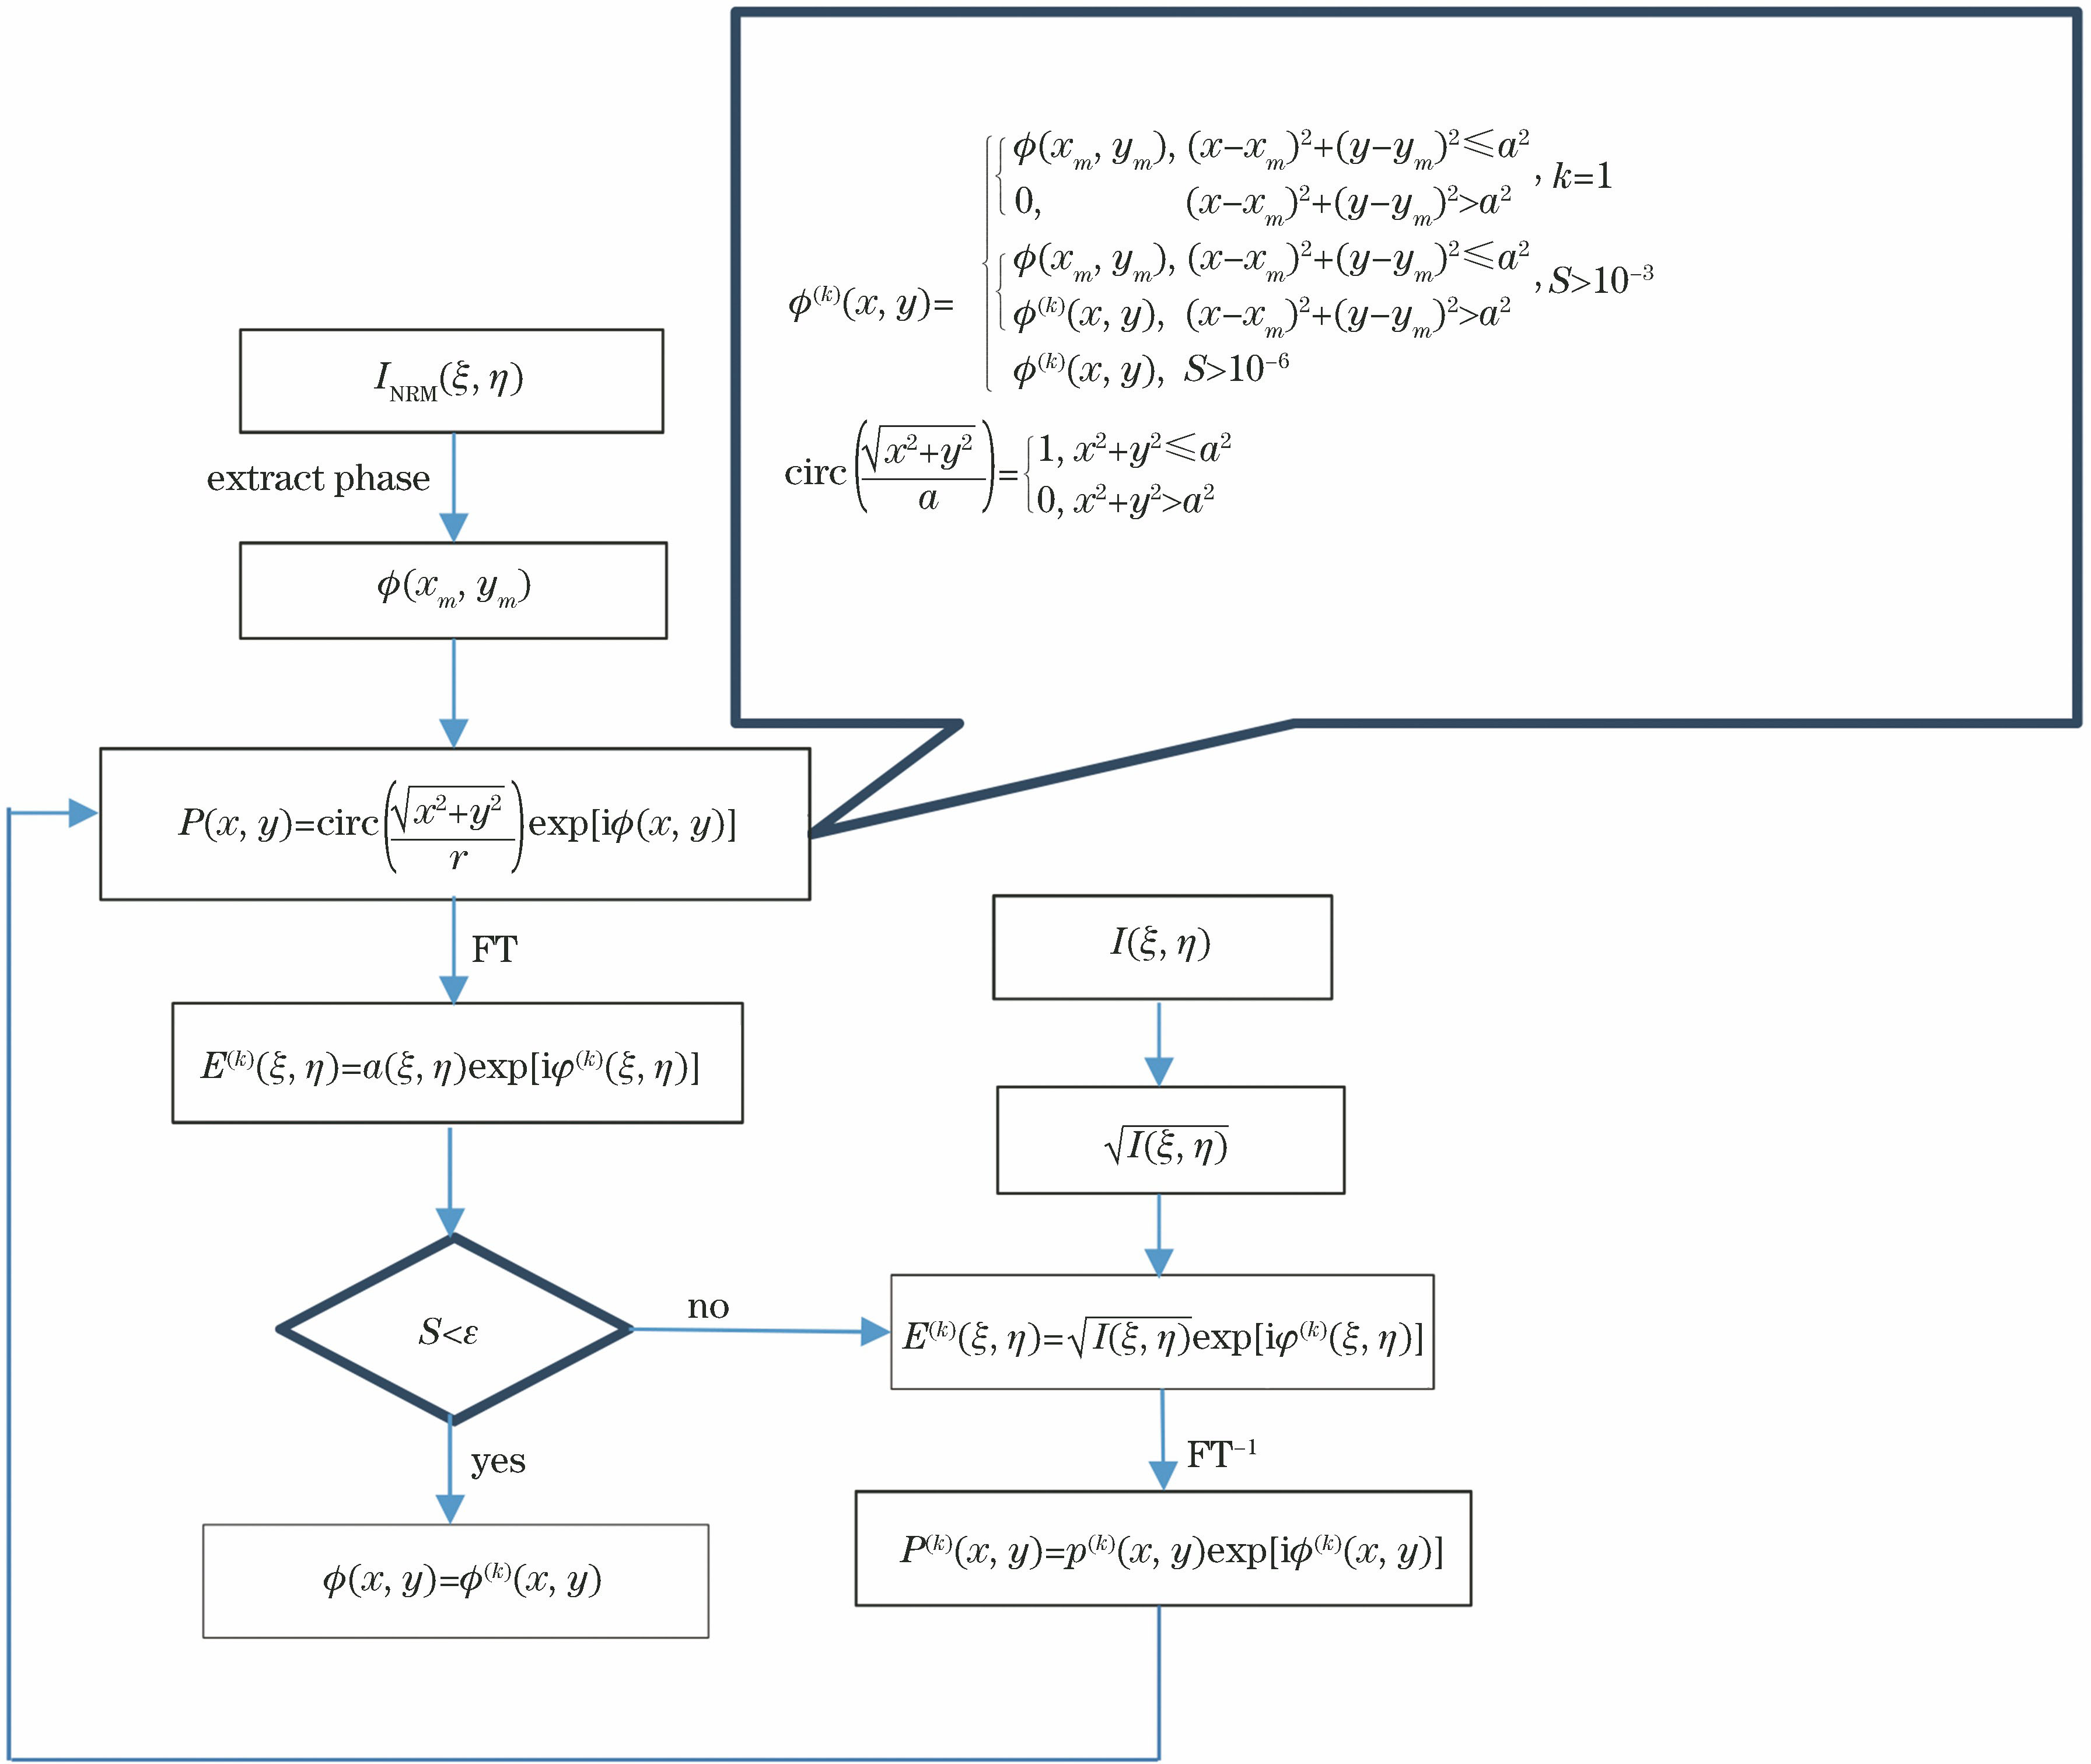 Flow chart of data processing based on NRM-GS algorithm